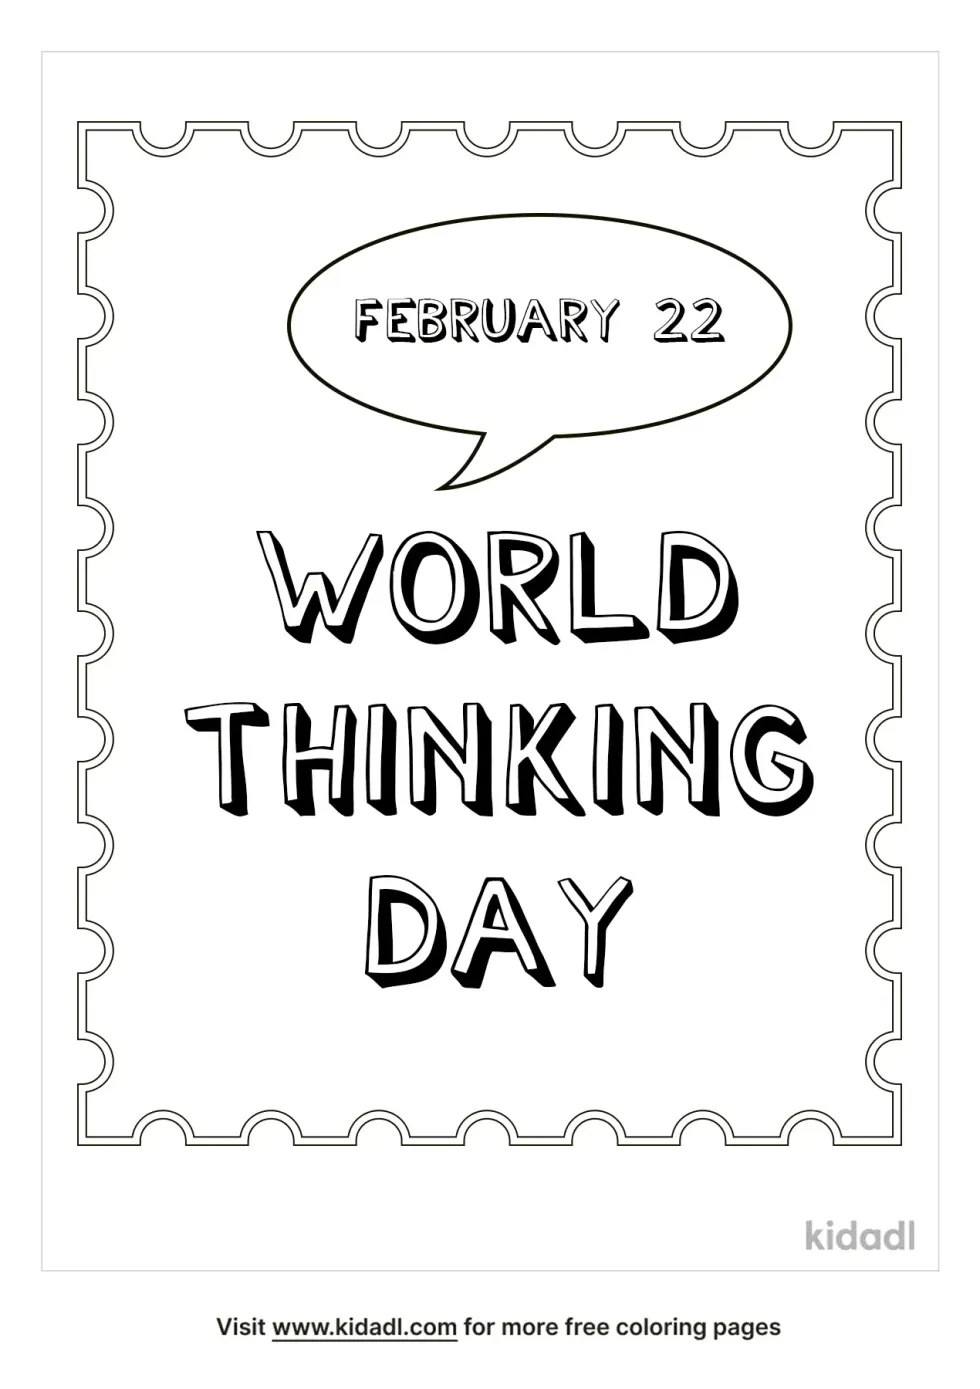 World Thinking Day Coloring Page